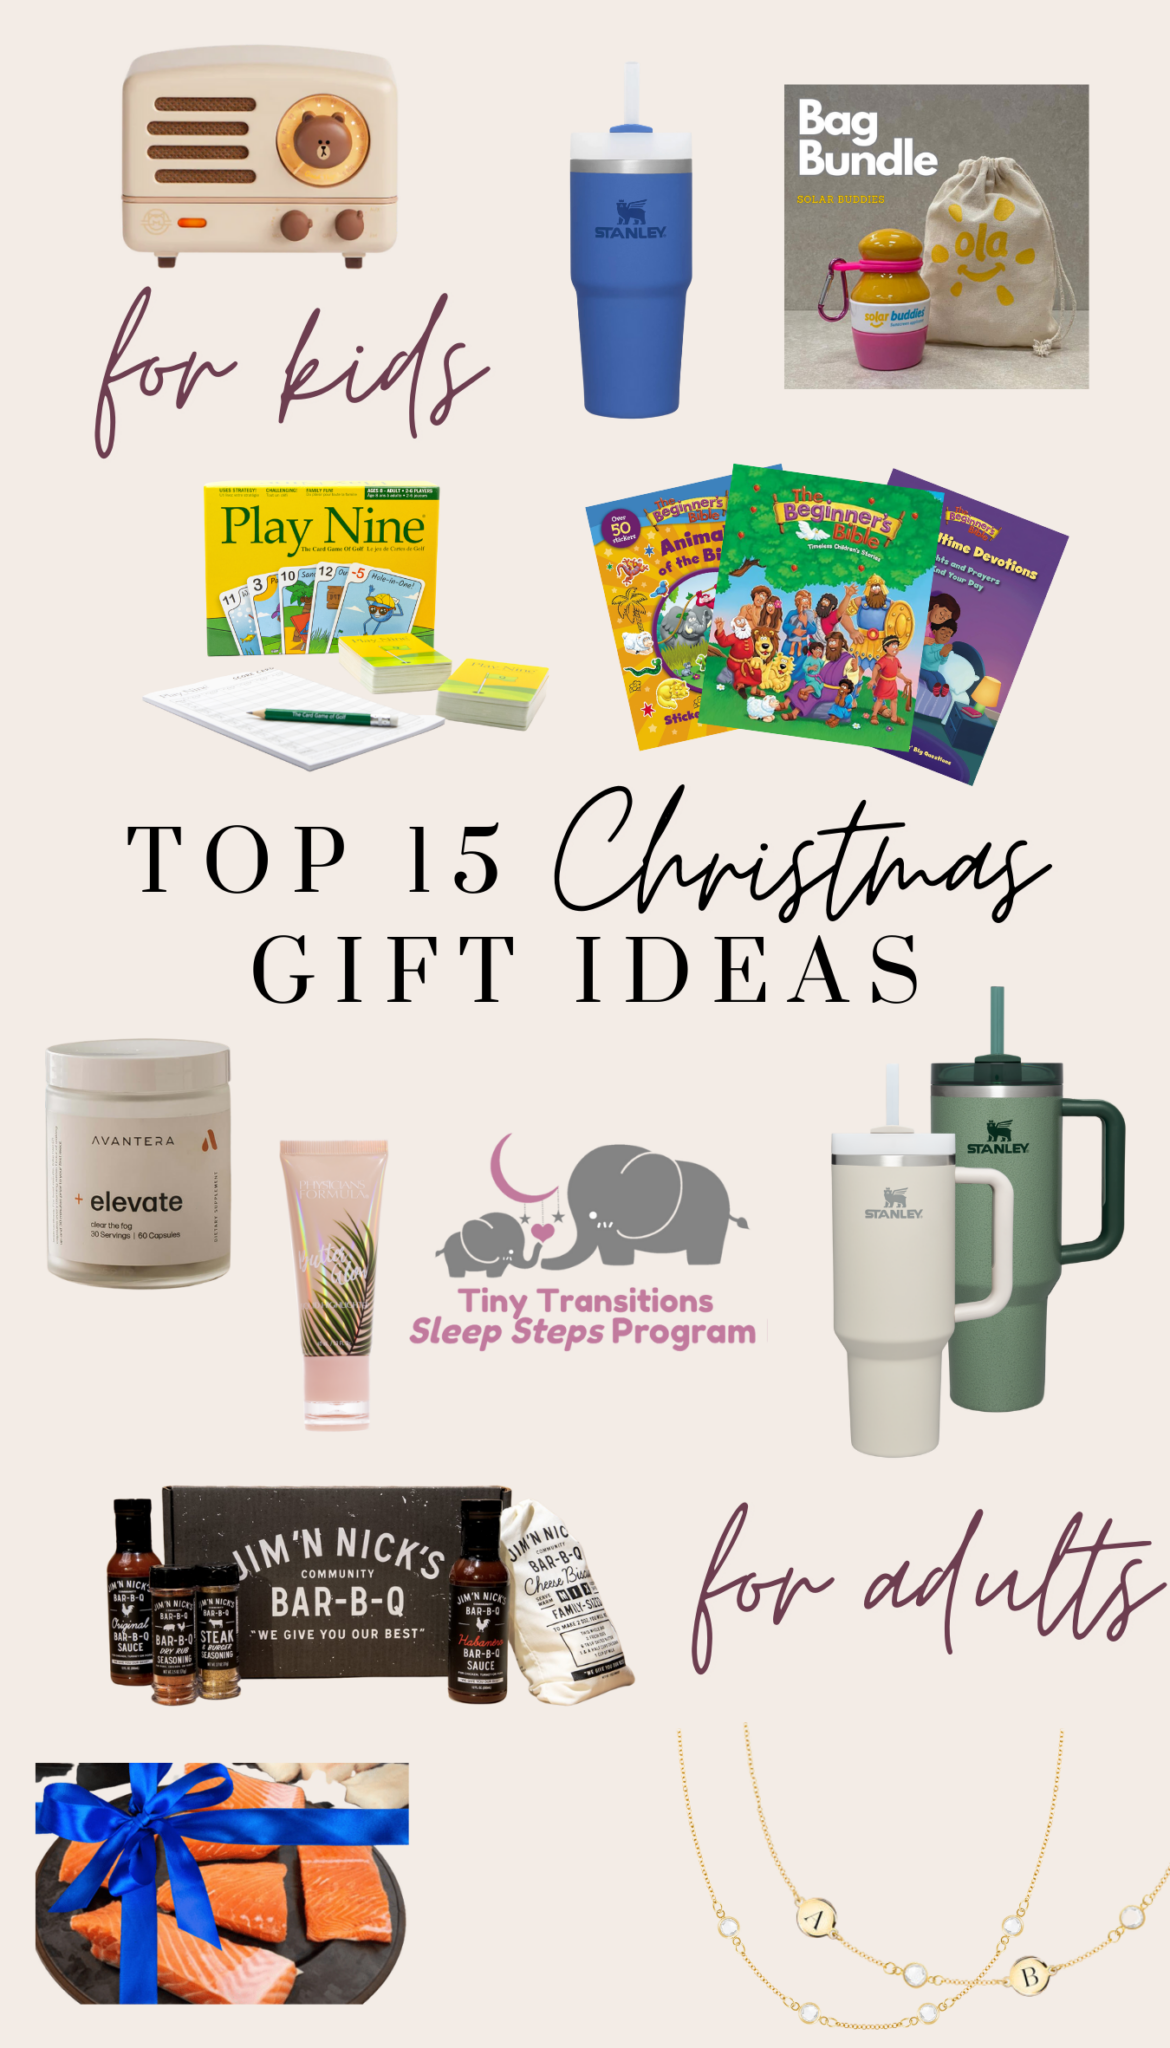 5 Most Helpful Gift Ideas to for New Parents